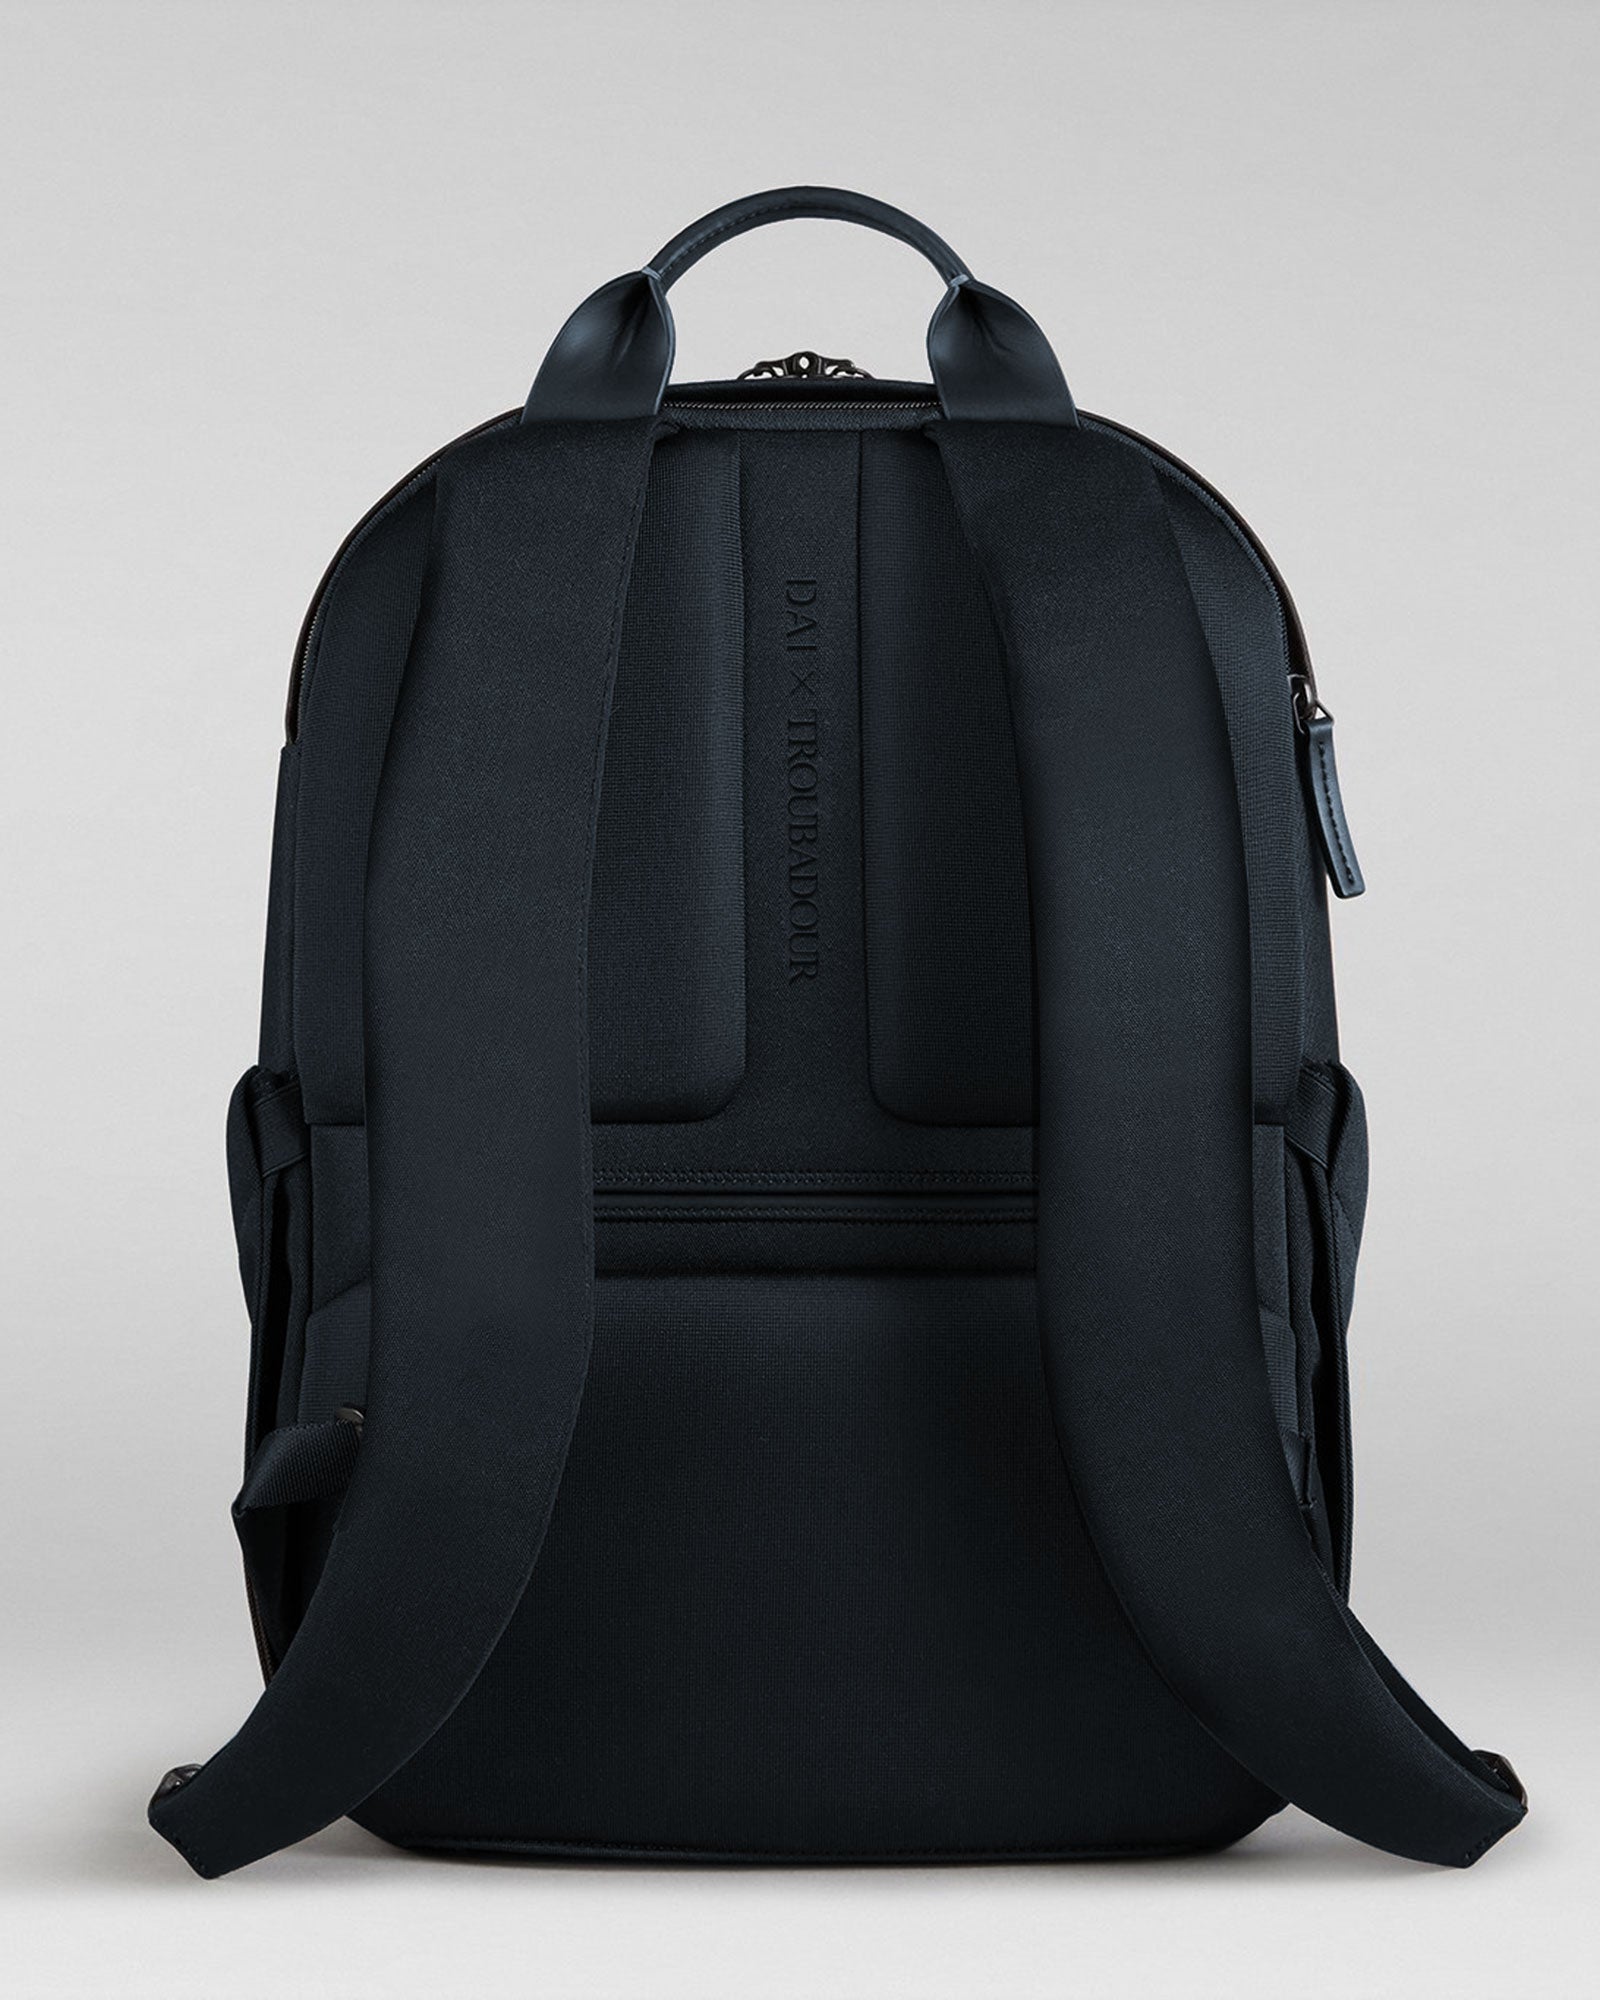 DAI x Troubadour Apex Compact Backpack Navy